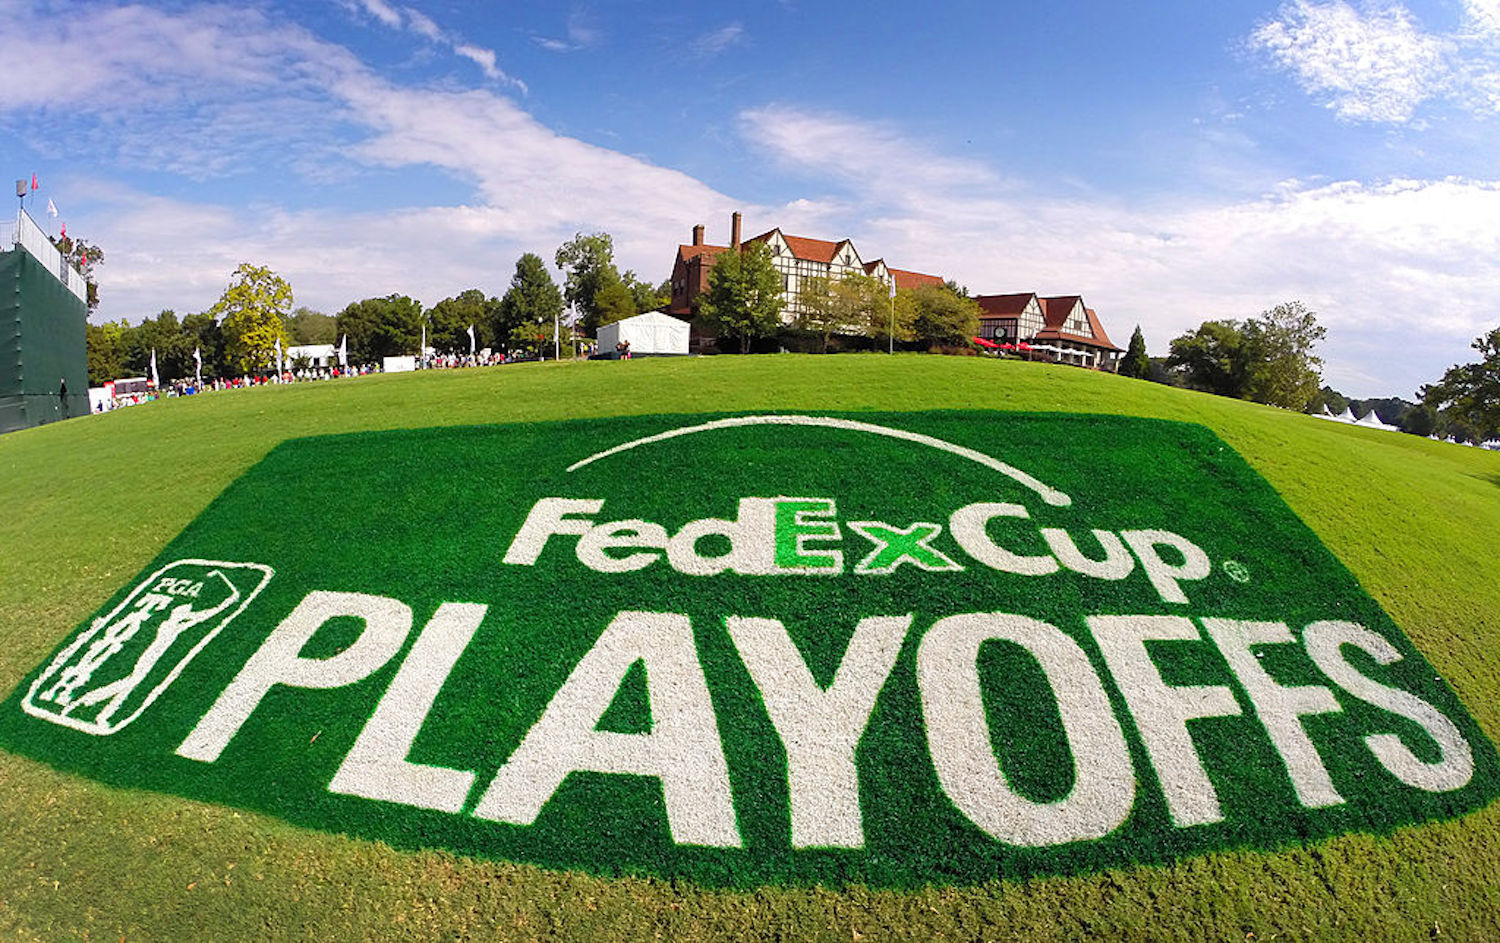 The 125-man field for the 2020 FedEx Cup Playoffs is set. Who's in, who's out, and who has a chance to win the $15 million prize?